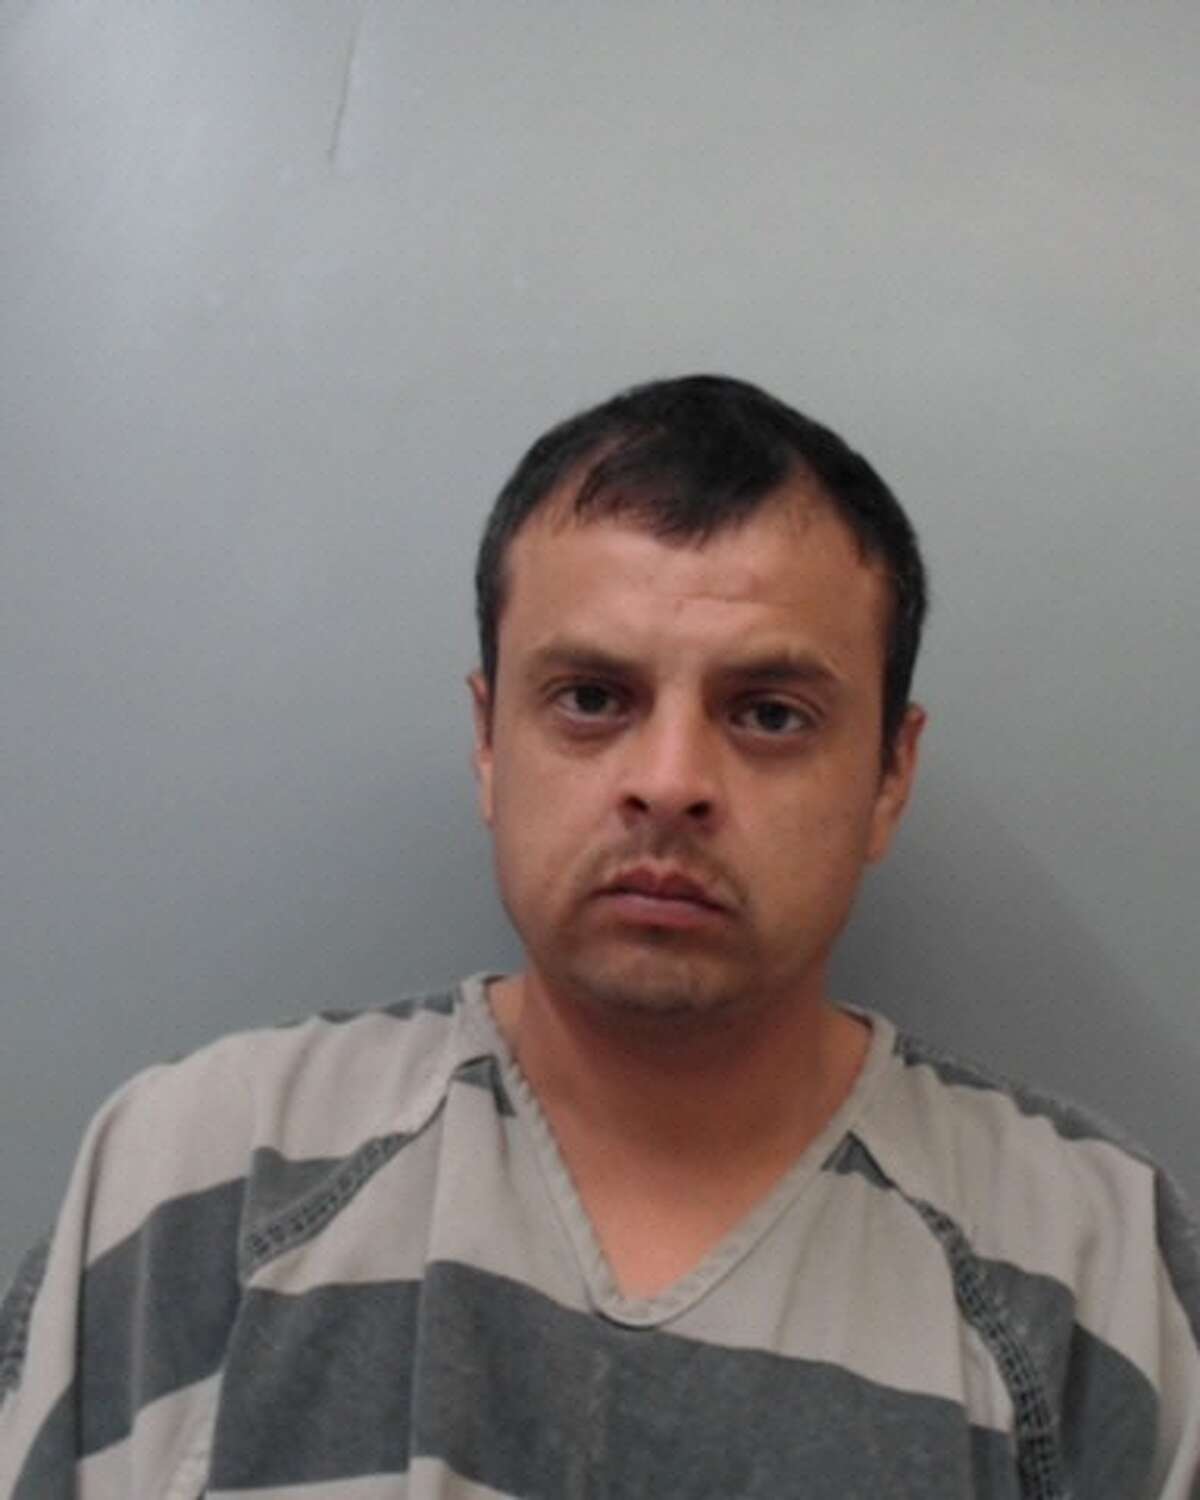 Sergio Villagrana-Avila, 39, was charged with aggravated robbery.